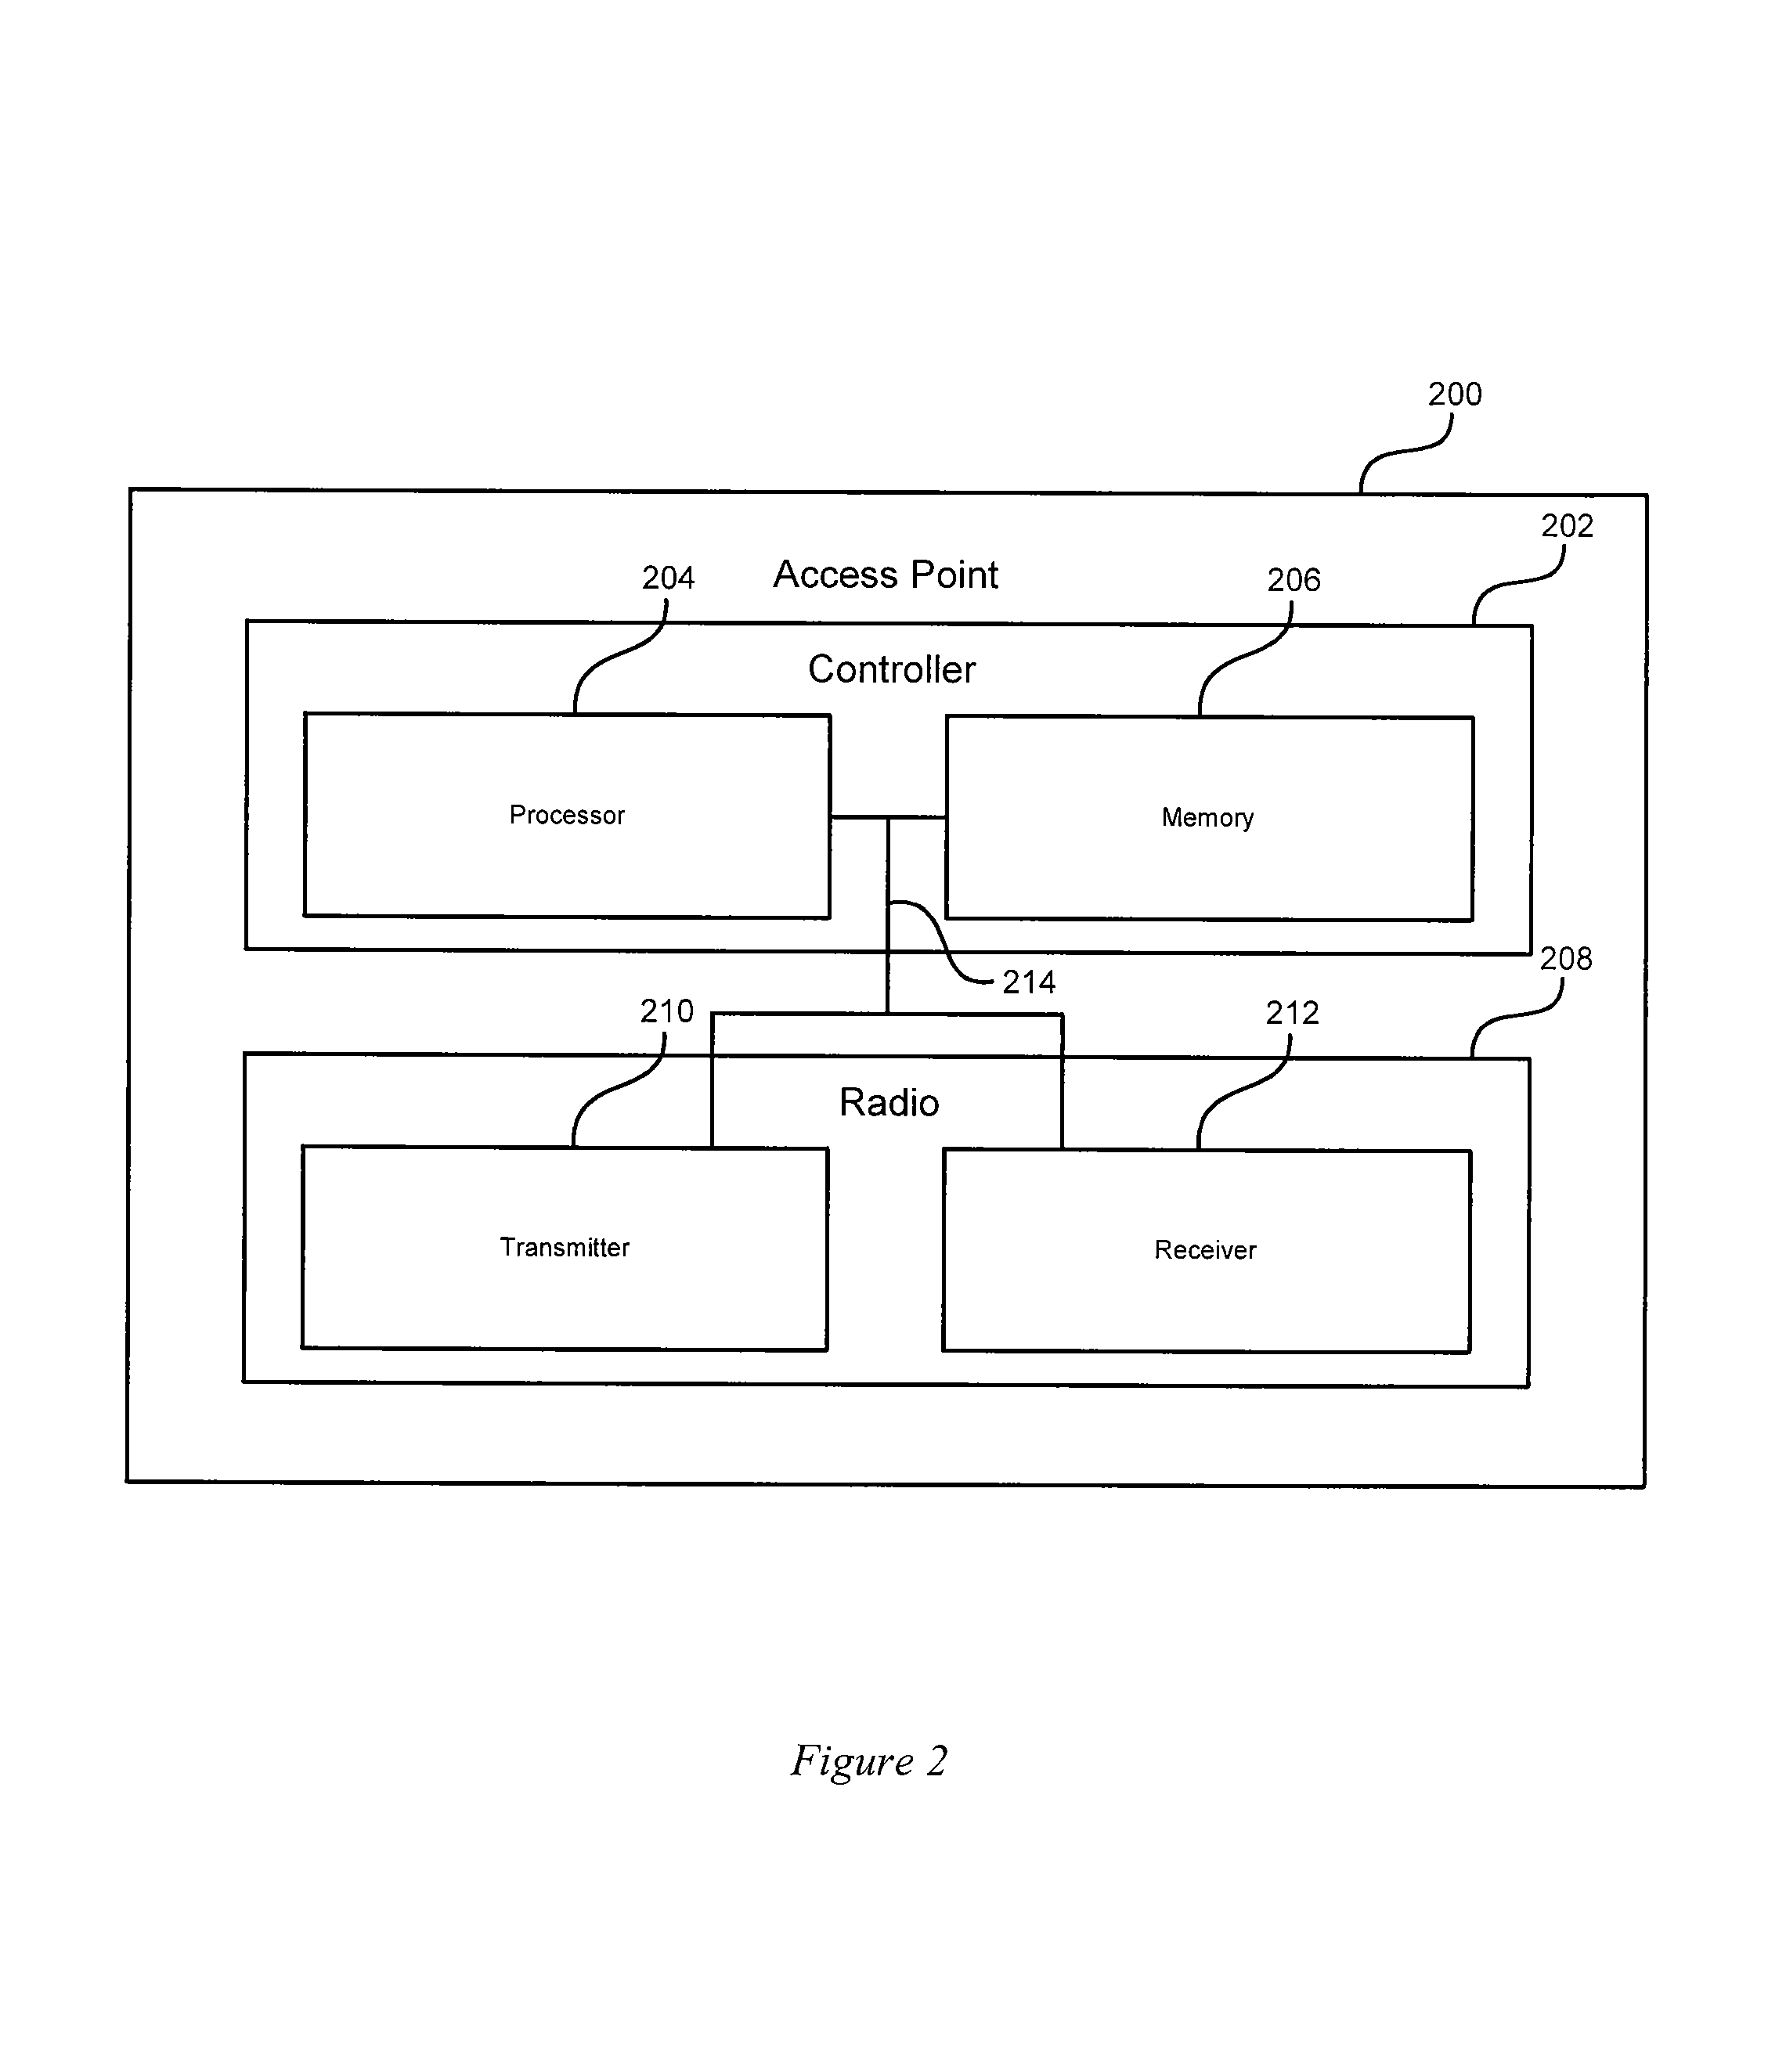 Method for multicast load balancing in wireless LANs